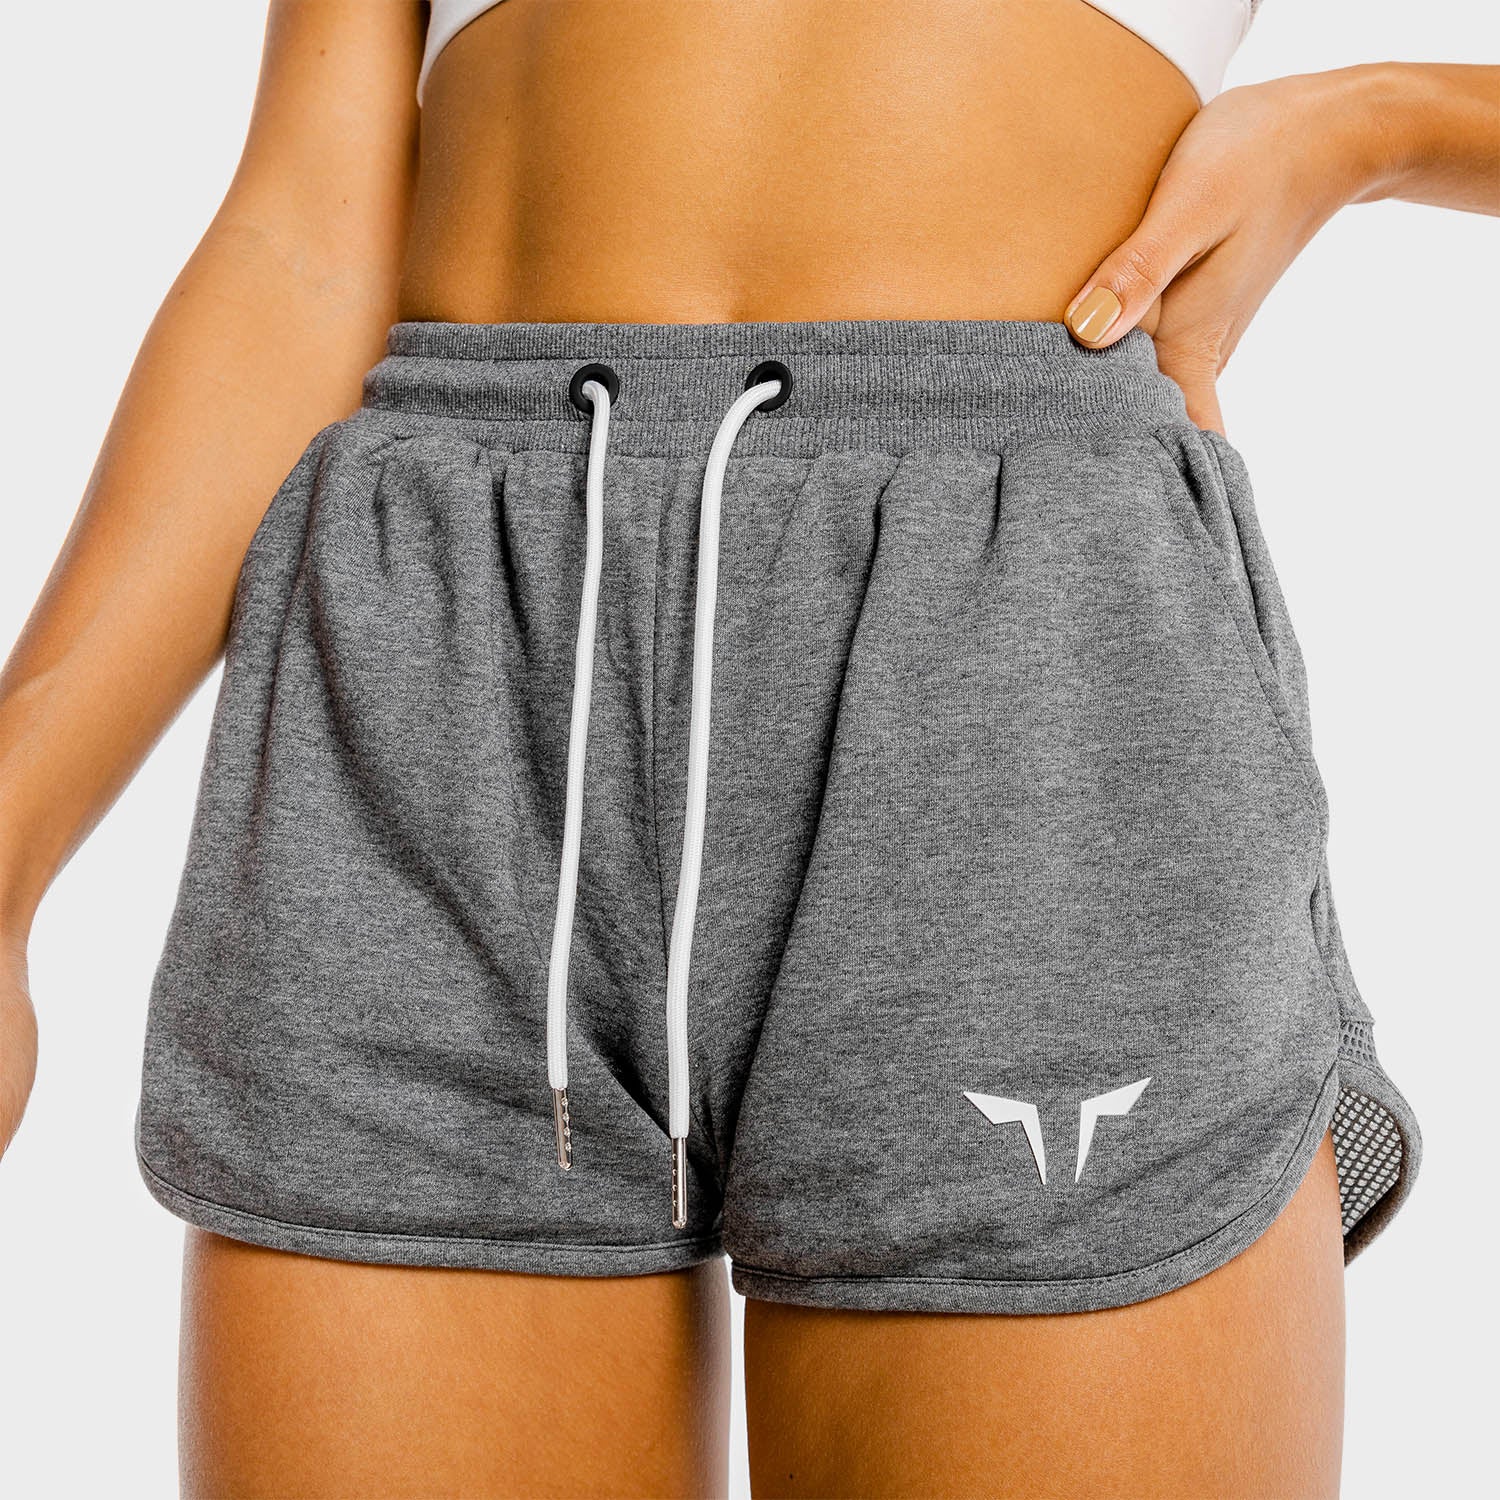 squatwolf-gym-shorts-for-women-she-wolf-shorts-dark-grey-workout-clothes